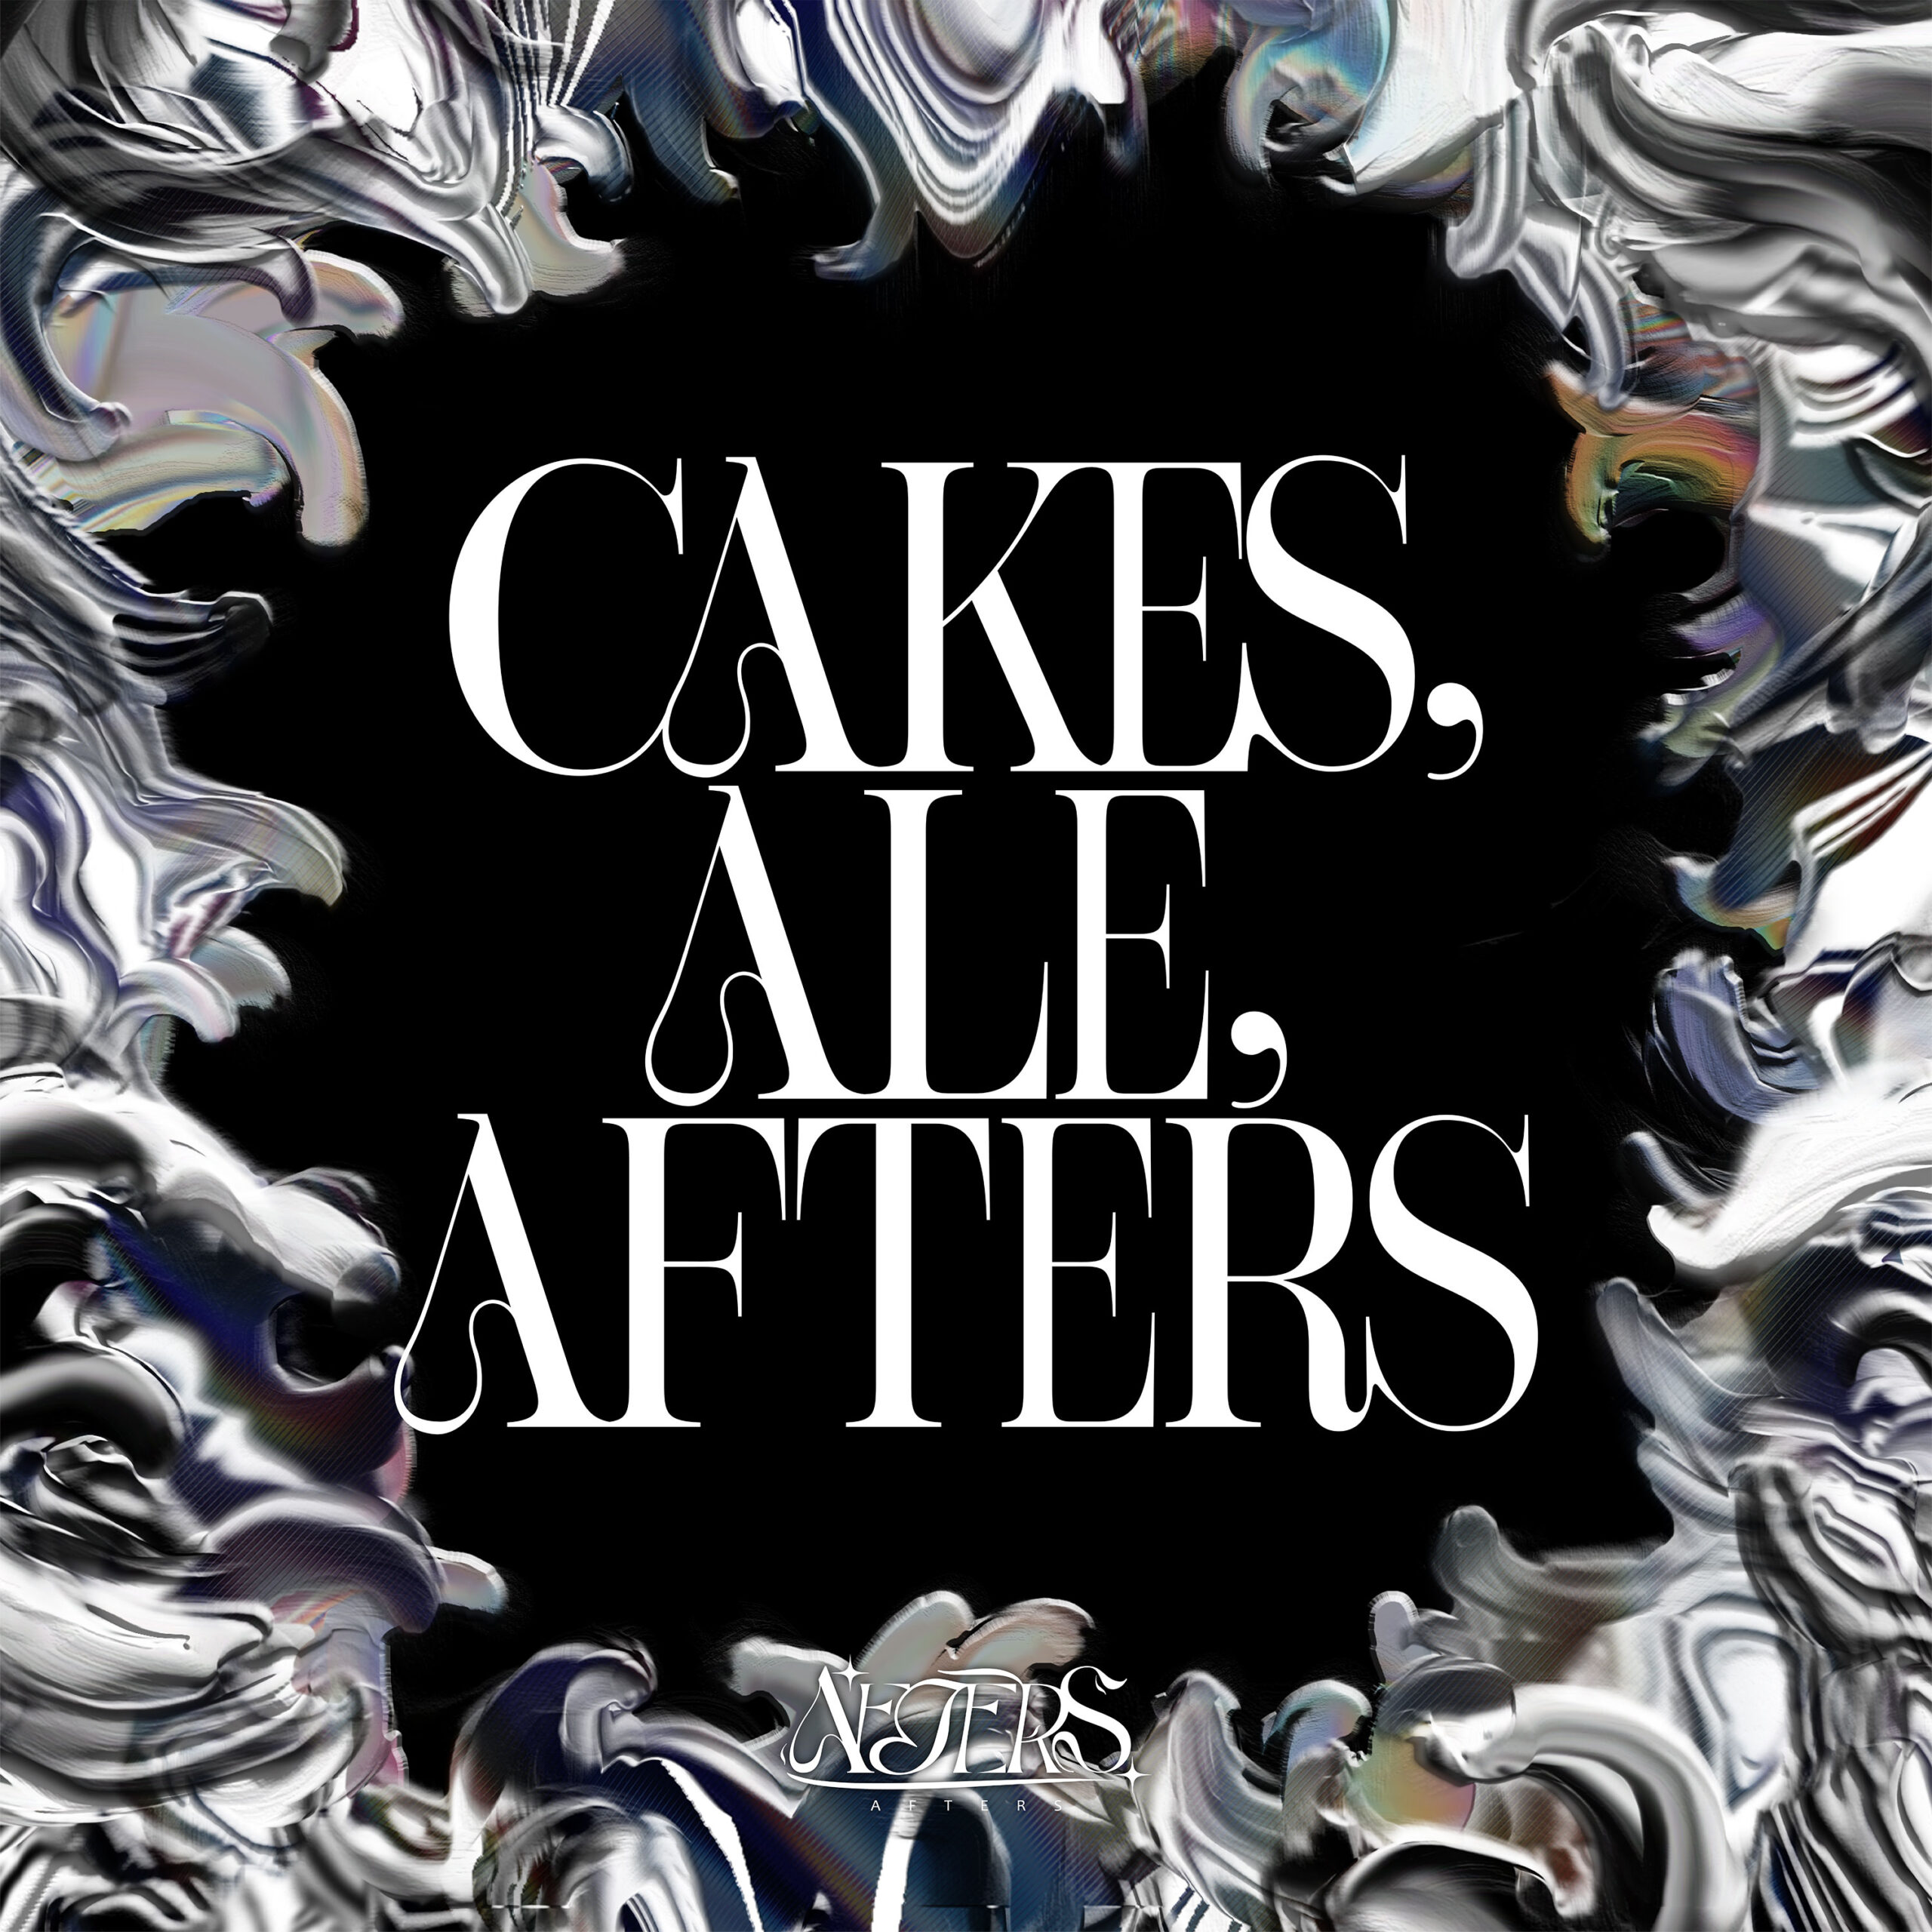 CAKES, ALE, AFTERS